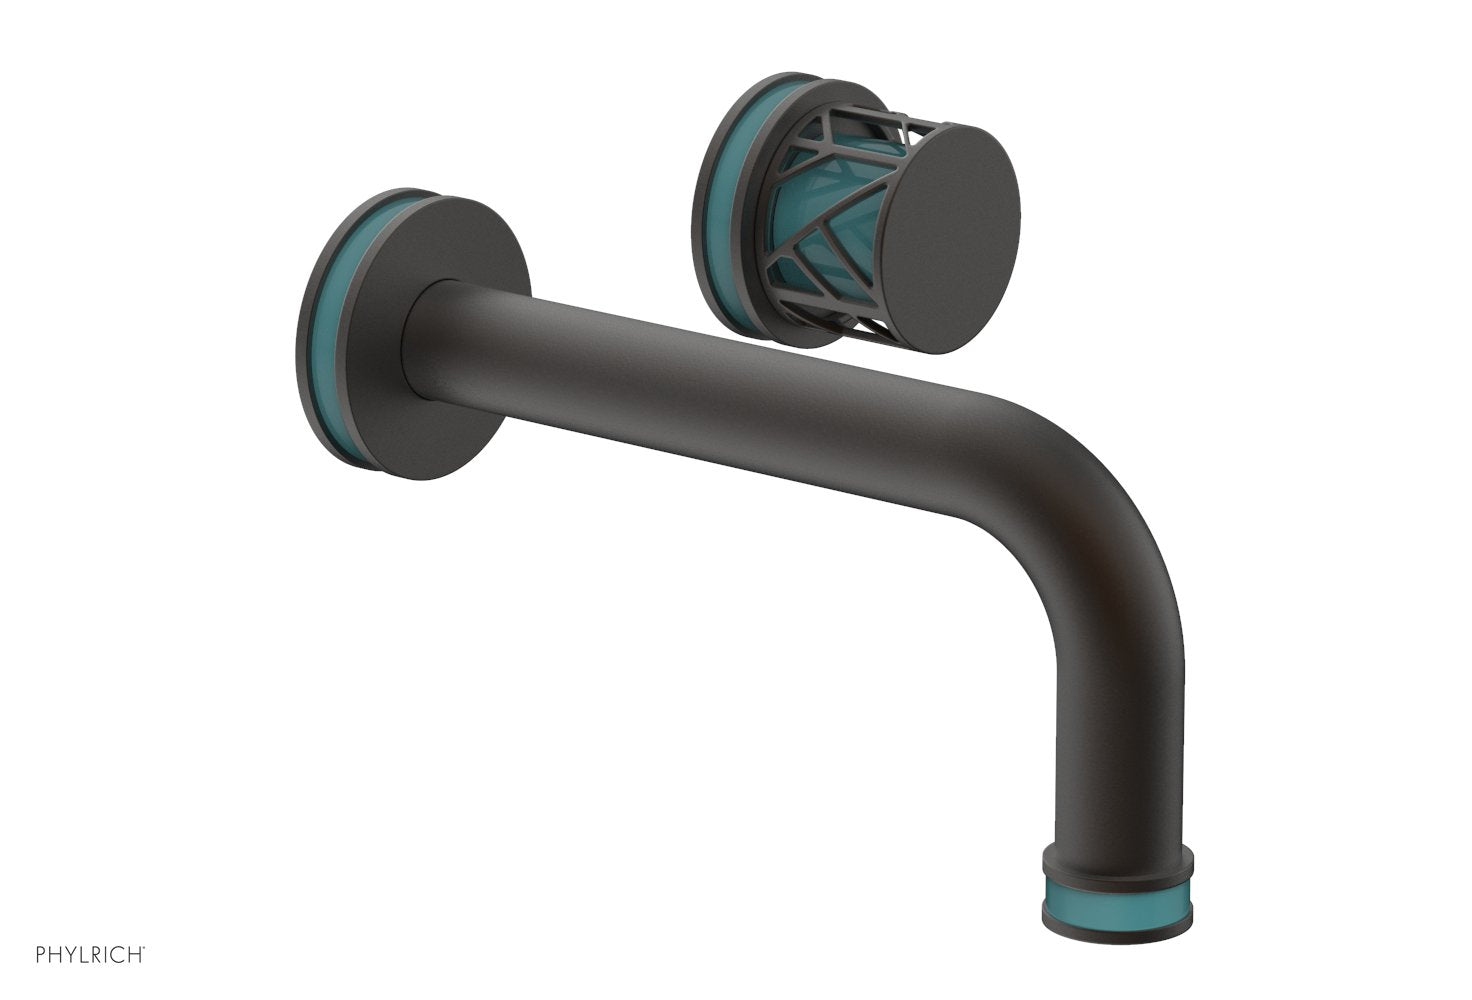 Phylrich JOLIE Single Handle Wall Lavatory Set - Round Handle "Turquoise" Accents